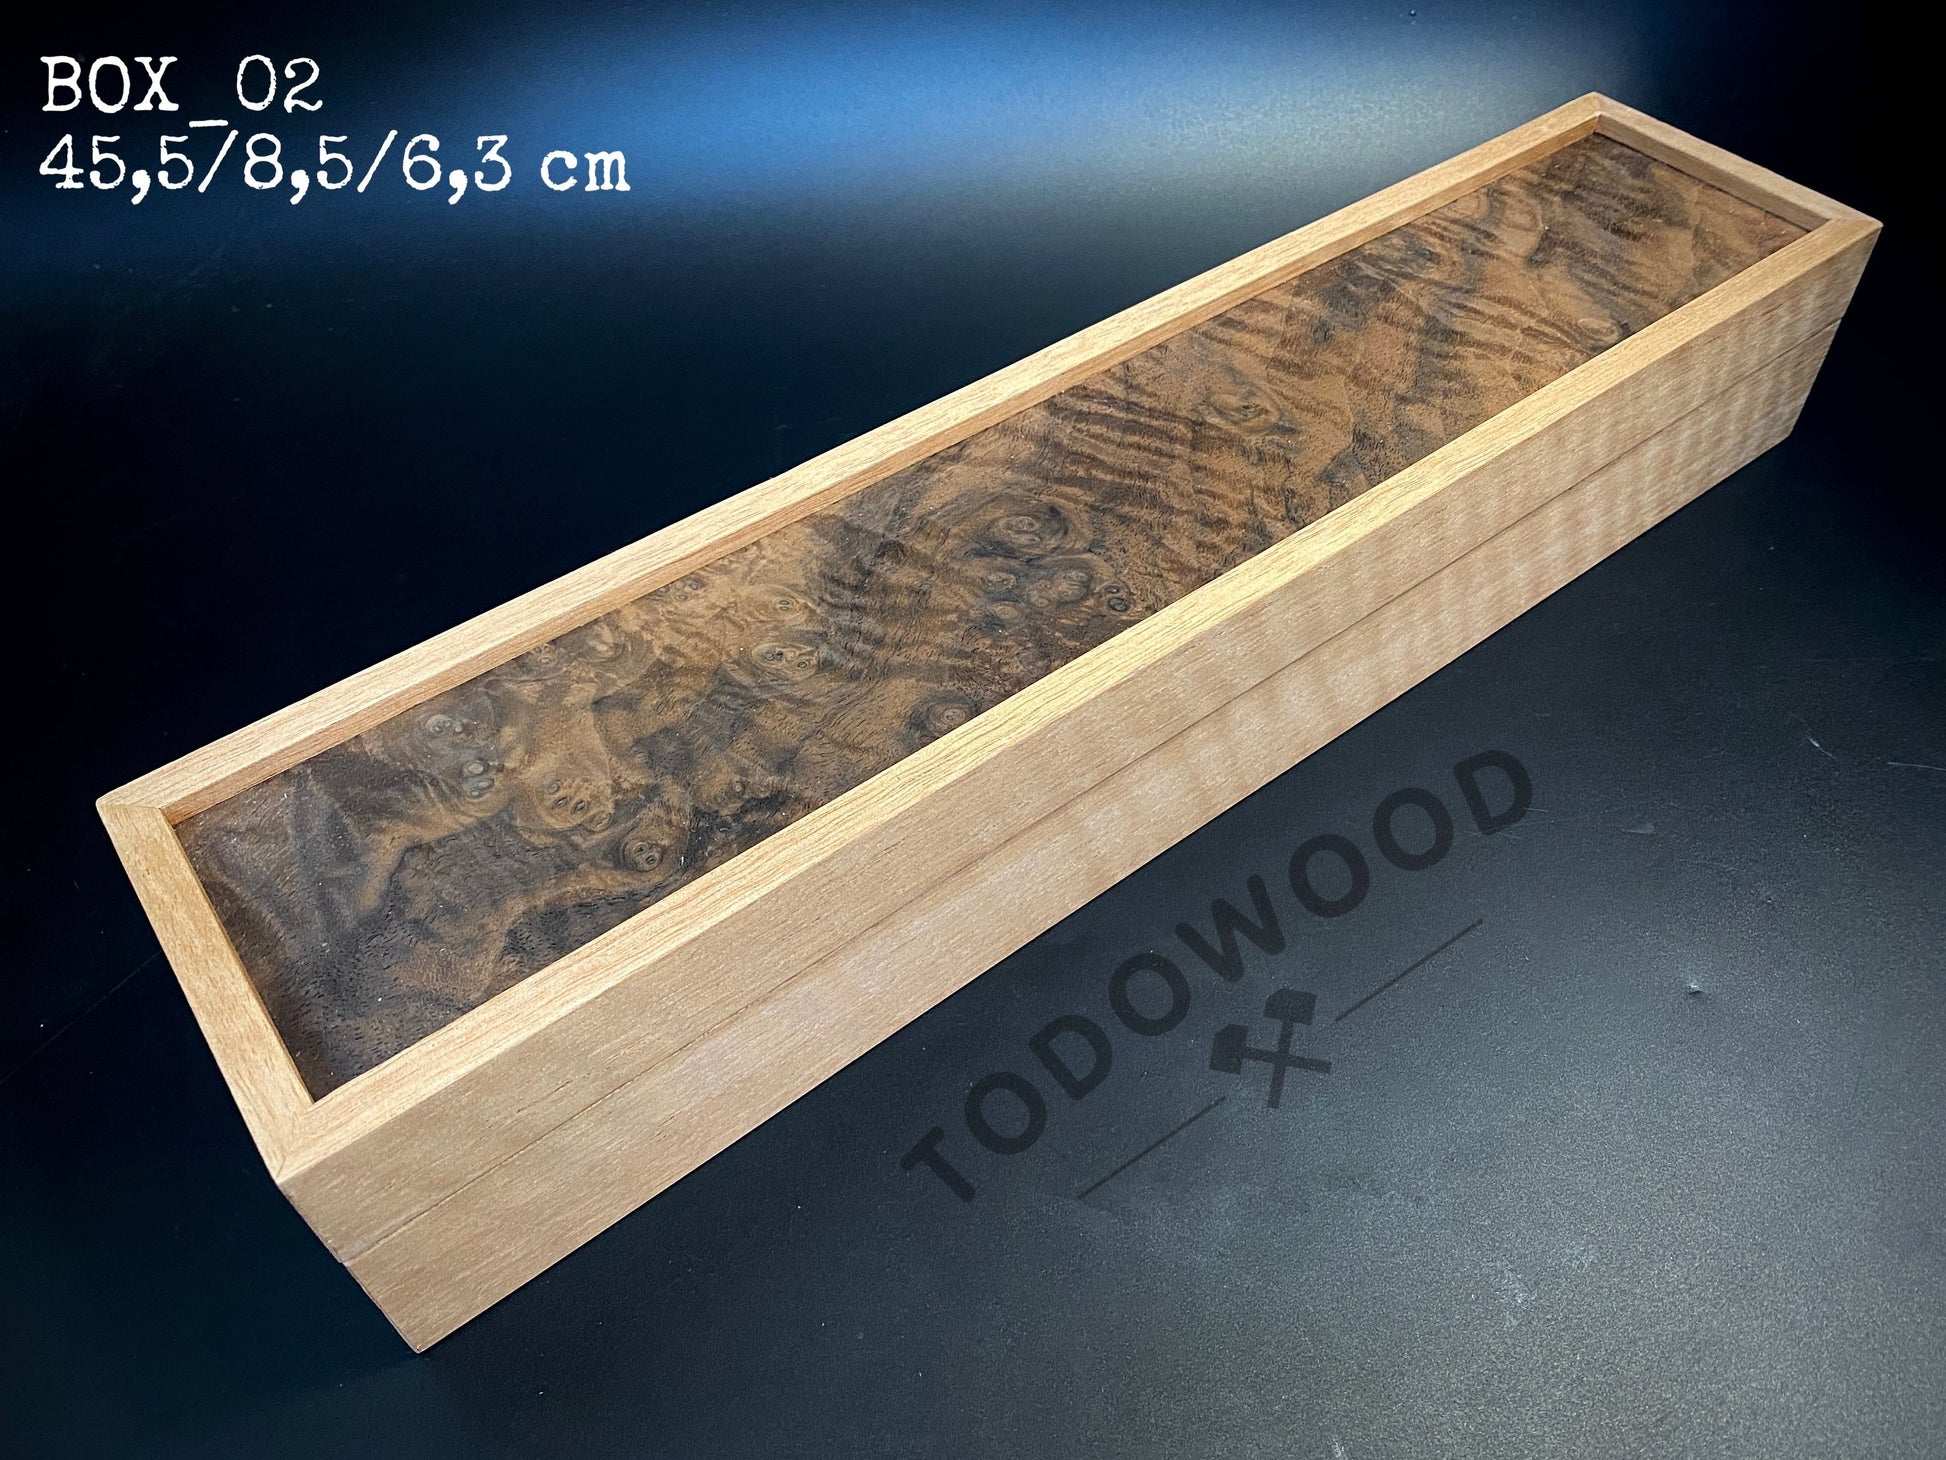 Box 430 mm. for premium knife packing, made of precious woods. #BOX_02